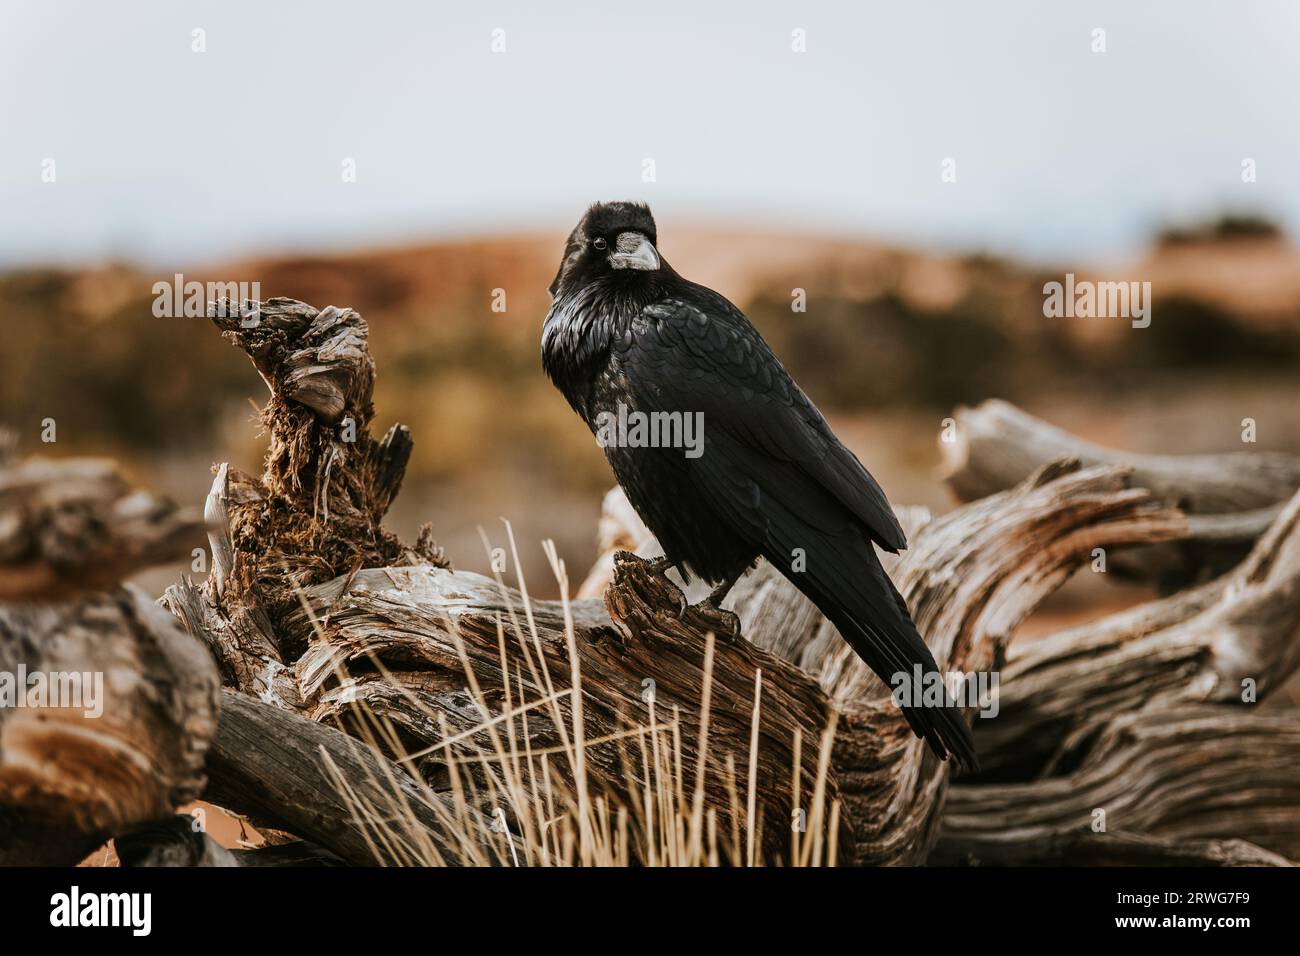 A black raven looking at the camera and perched on twisted wood in Moab, Utah. Stock Photo